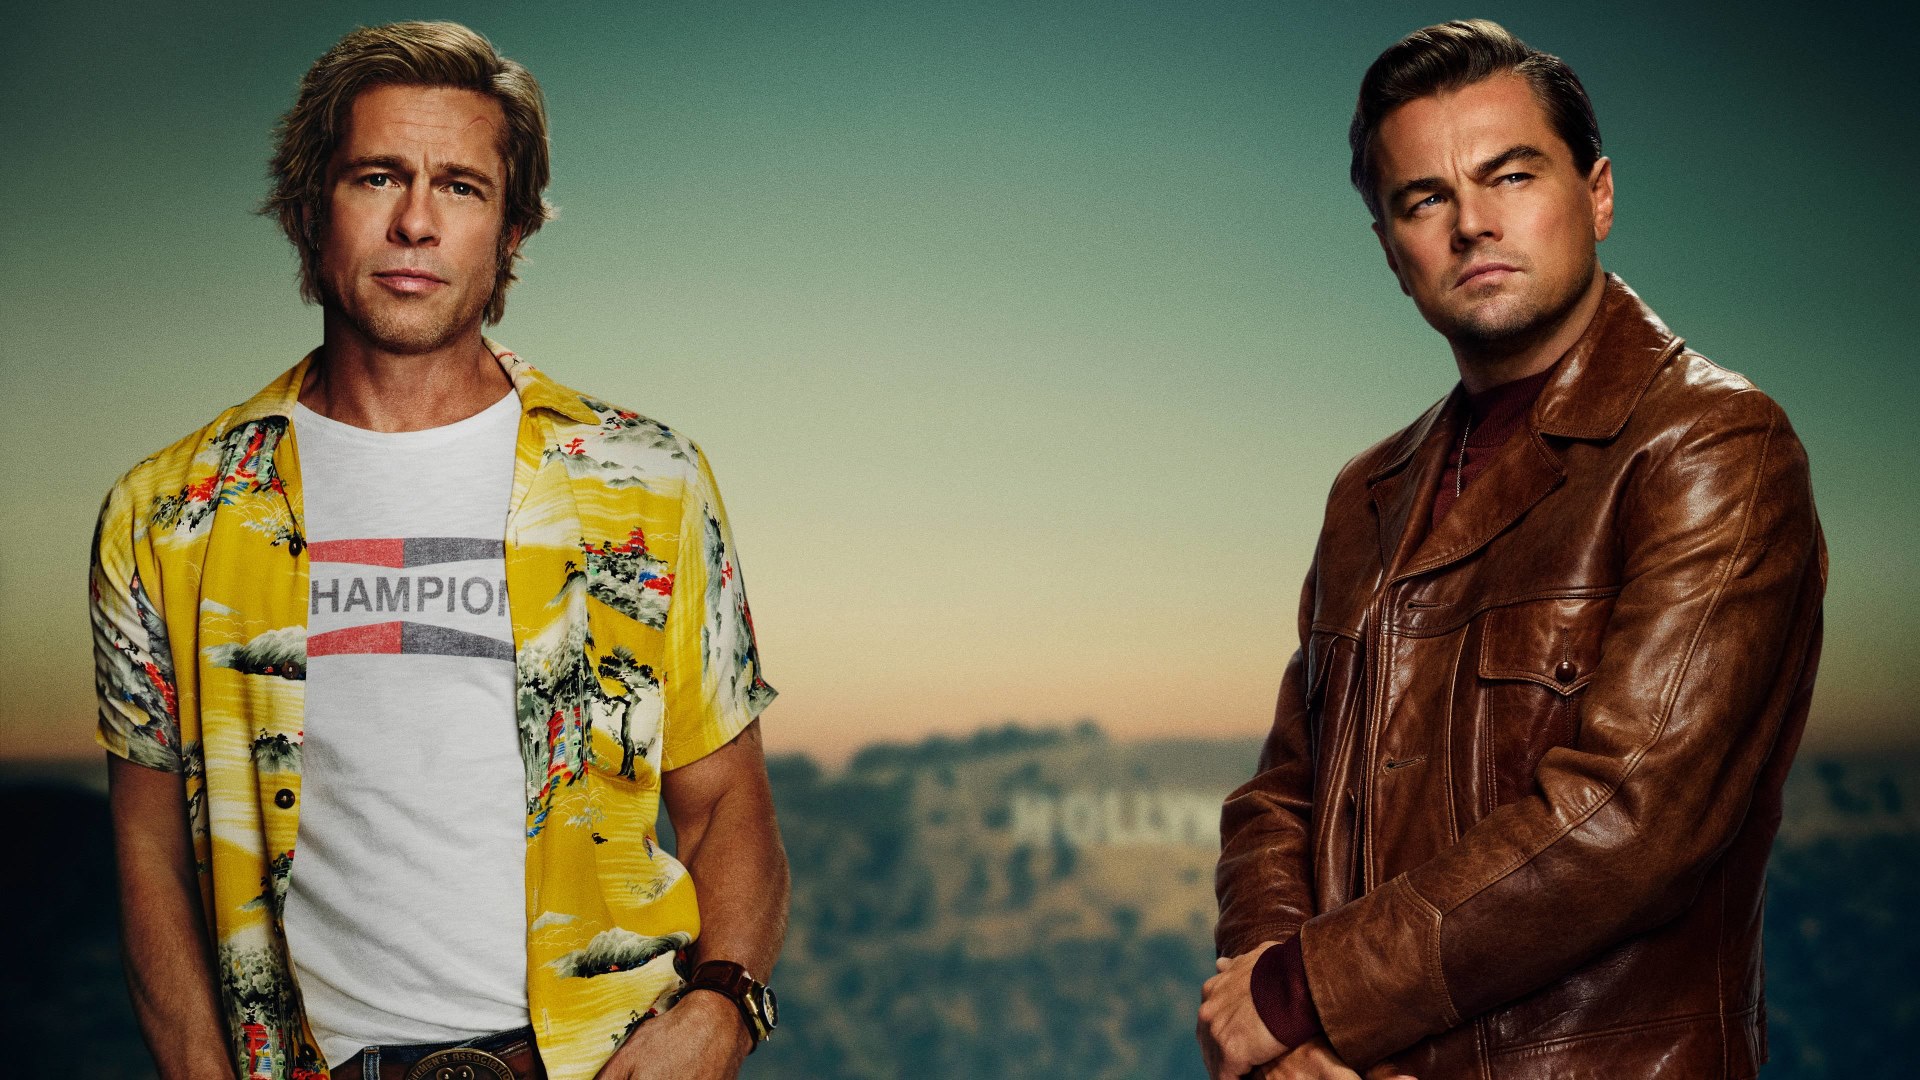 Voir Once Upon a Time in Hollywood 2019 Film Complet HD en Streaming VF.